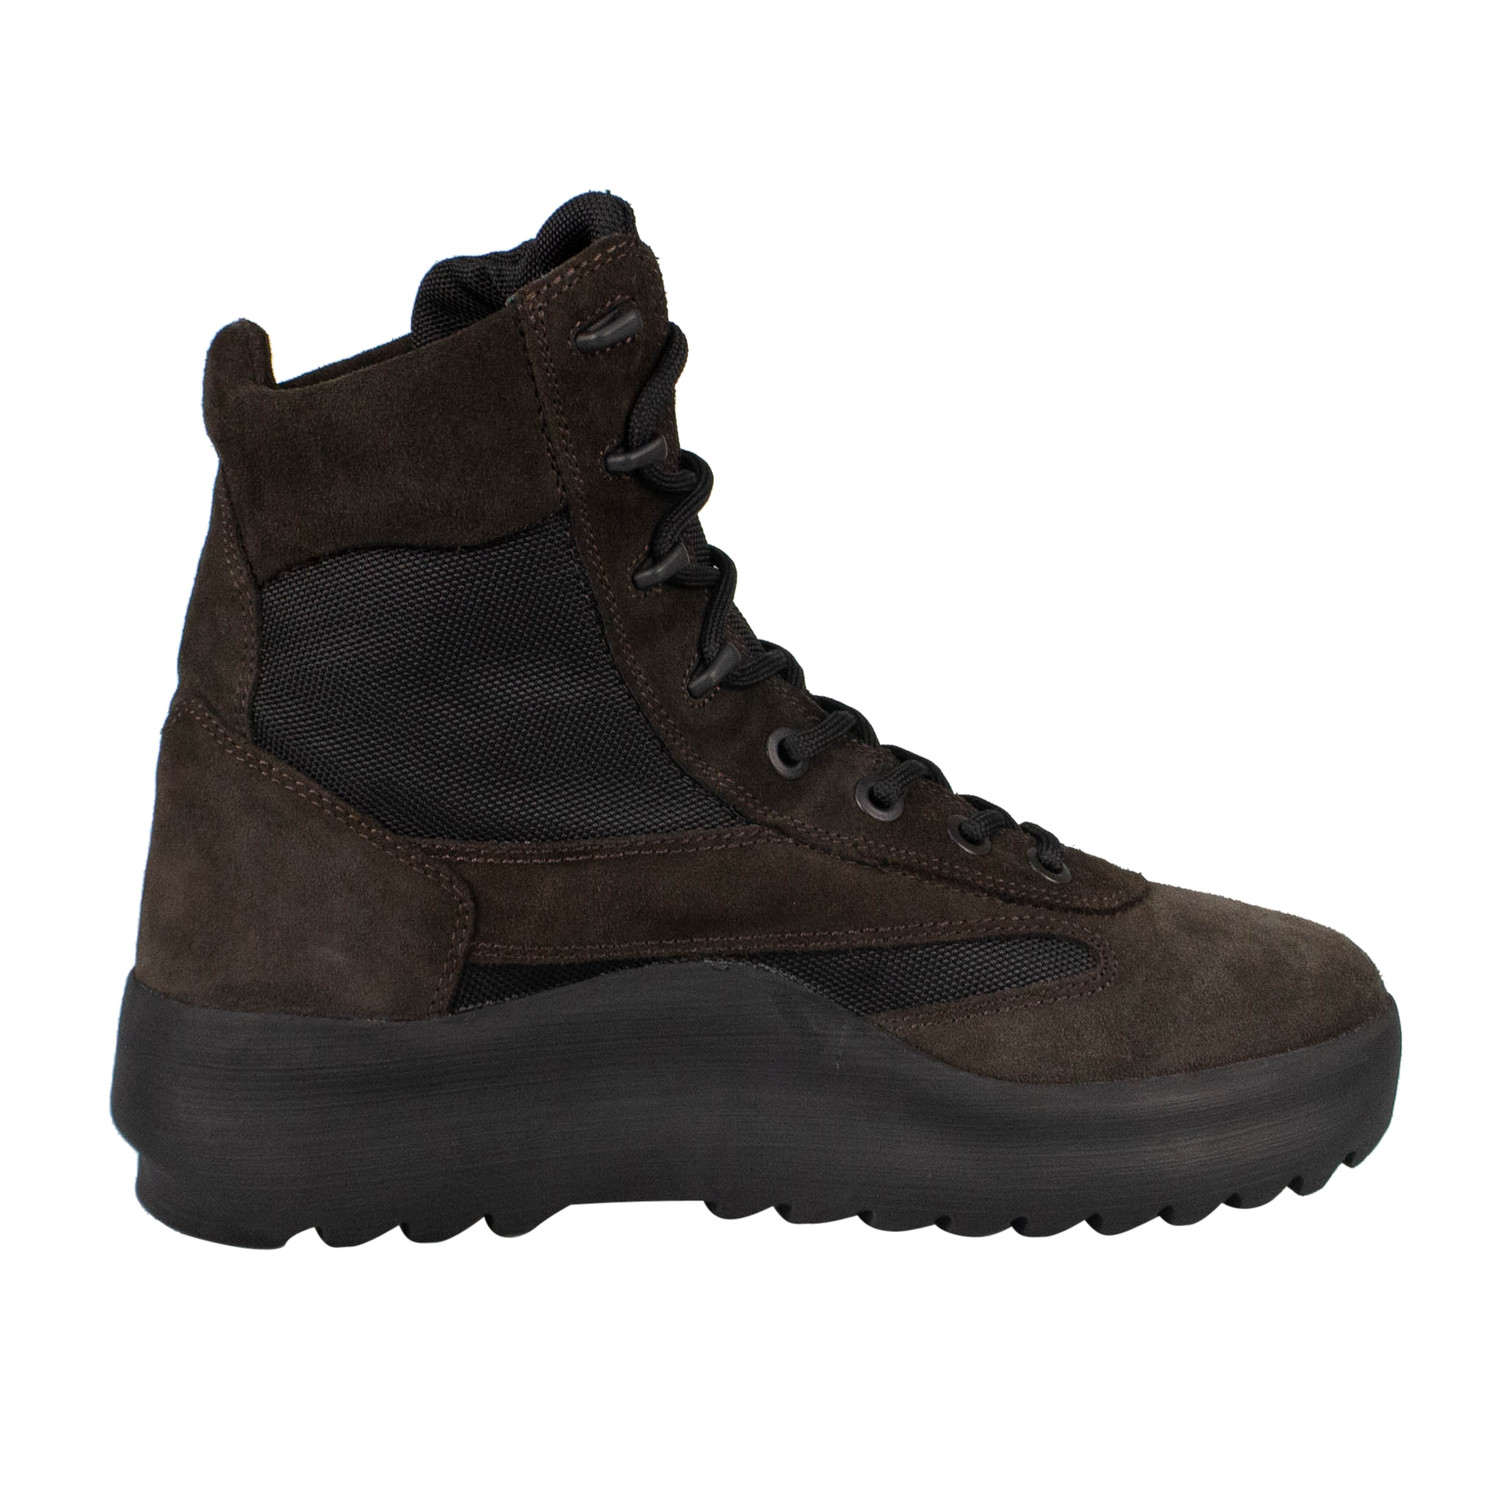 Yeezy // Season 5 Oil Thick Suede + Nylon Lace-Up Military Boots ...